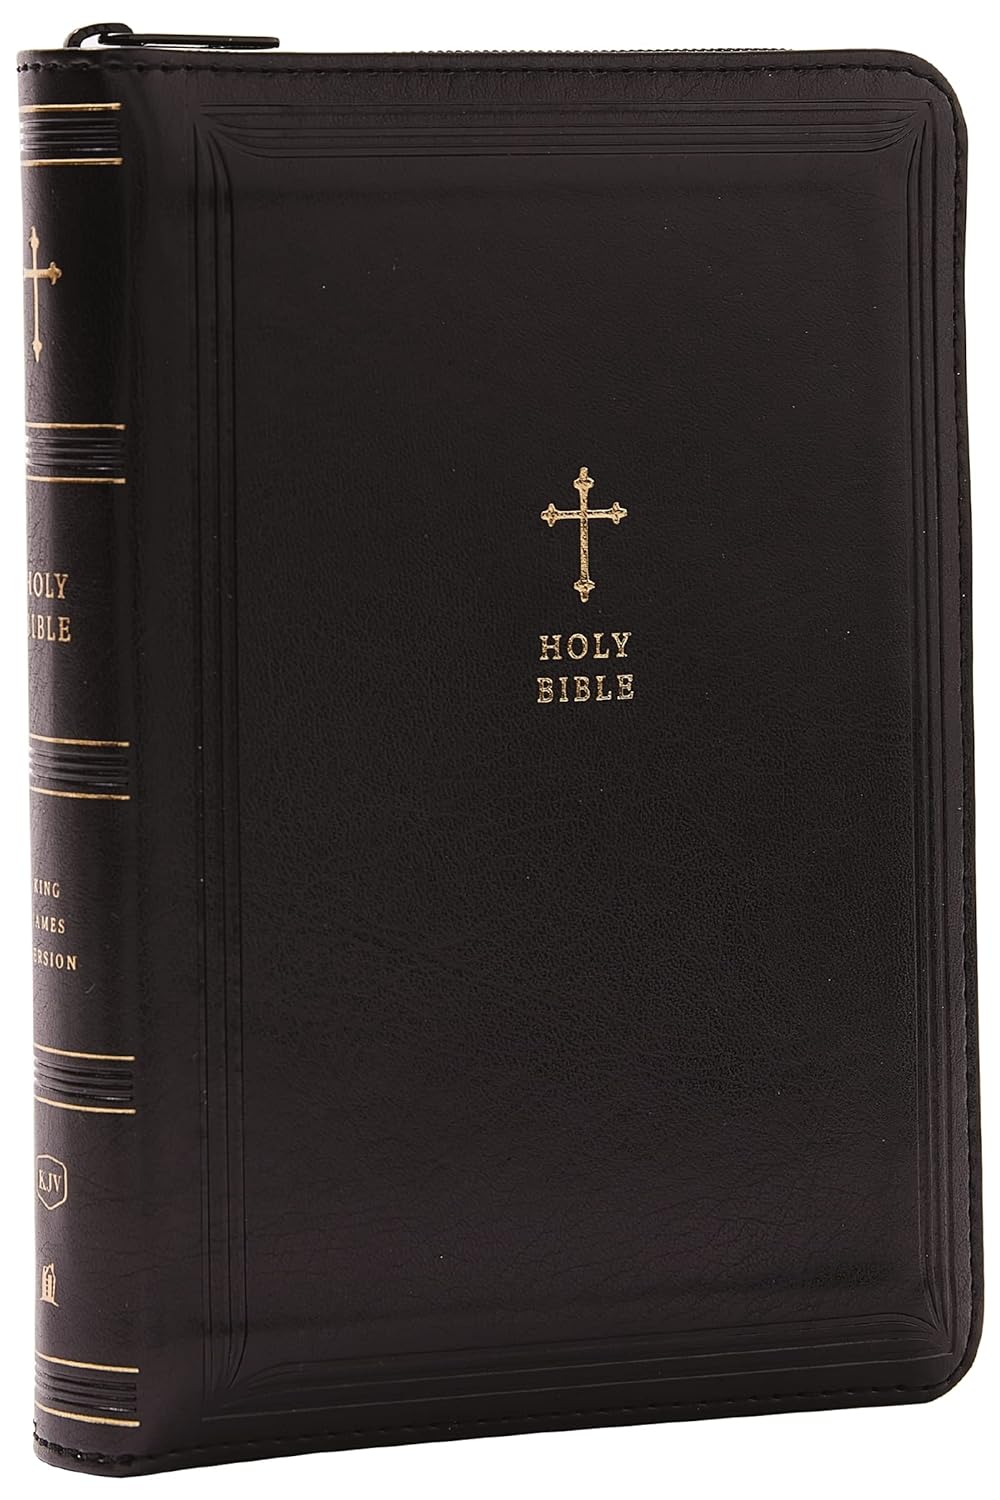 KJV Holy Bible : Compact with 43,000 Cross References - Black Leather Soft w/ Zipper